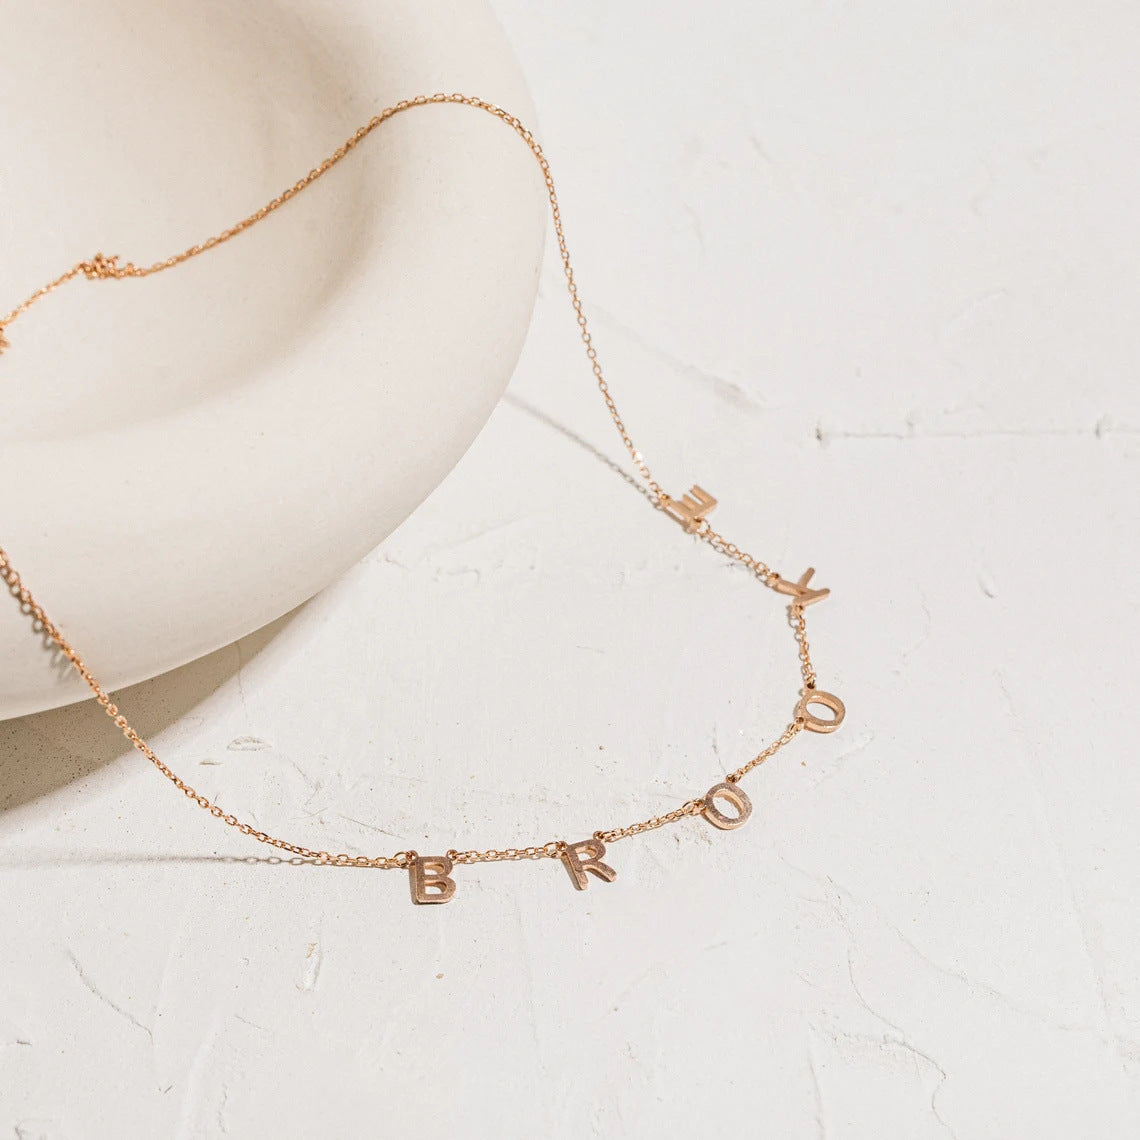 Amara initial necklace displayed on a white dish in rose gold with initials B R O O K E.